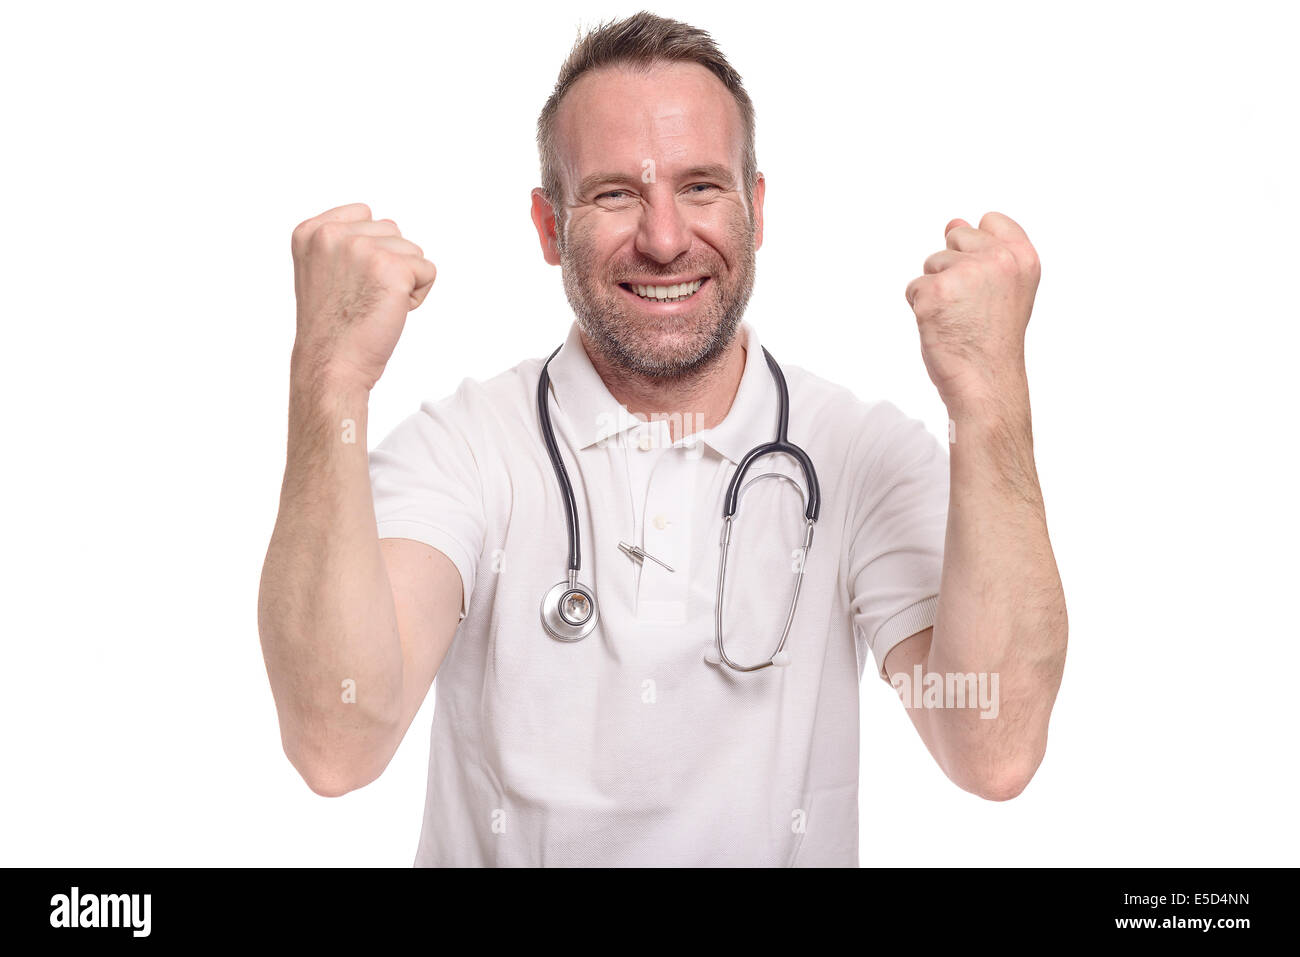 Enthusiastic unshaven middle-aged doctor punching the air with his fist celebrating a successful treatment or prognosis with a l Stock Photo